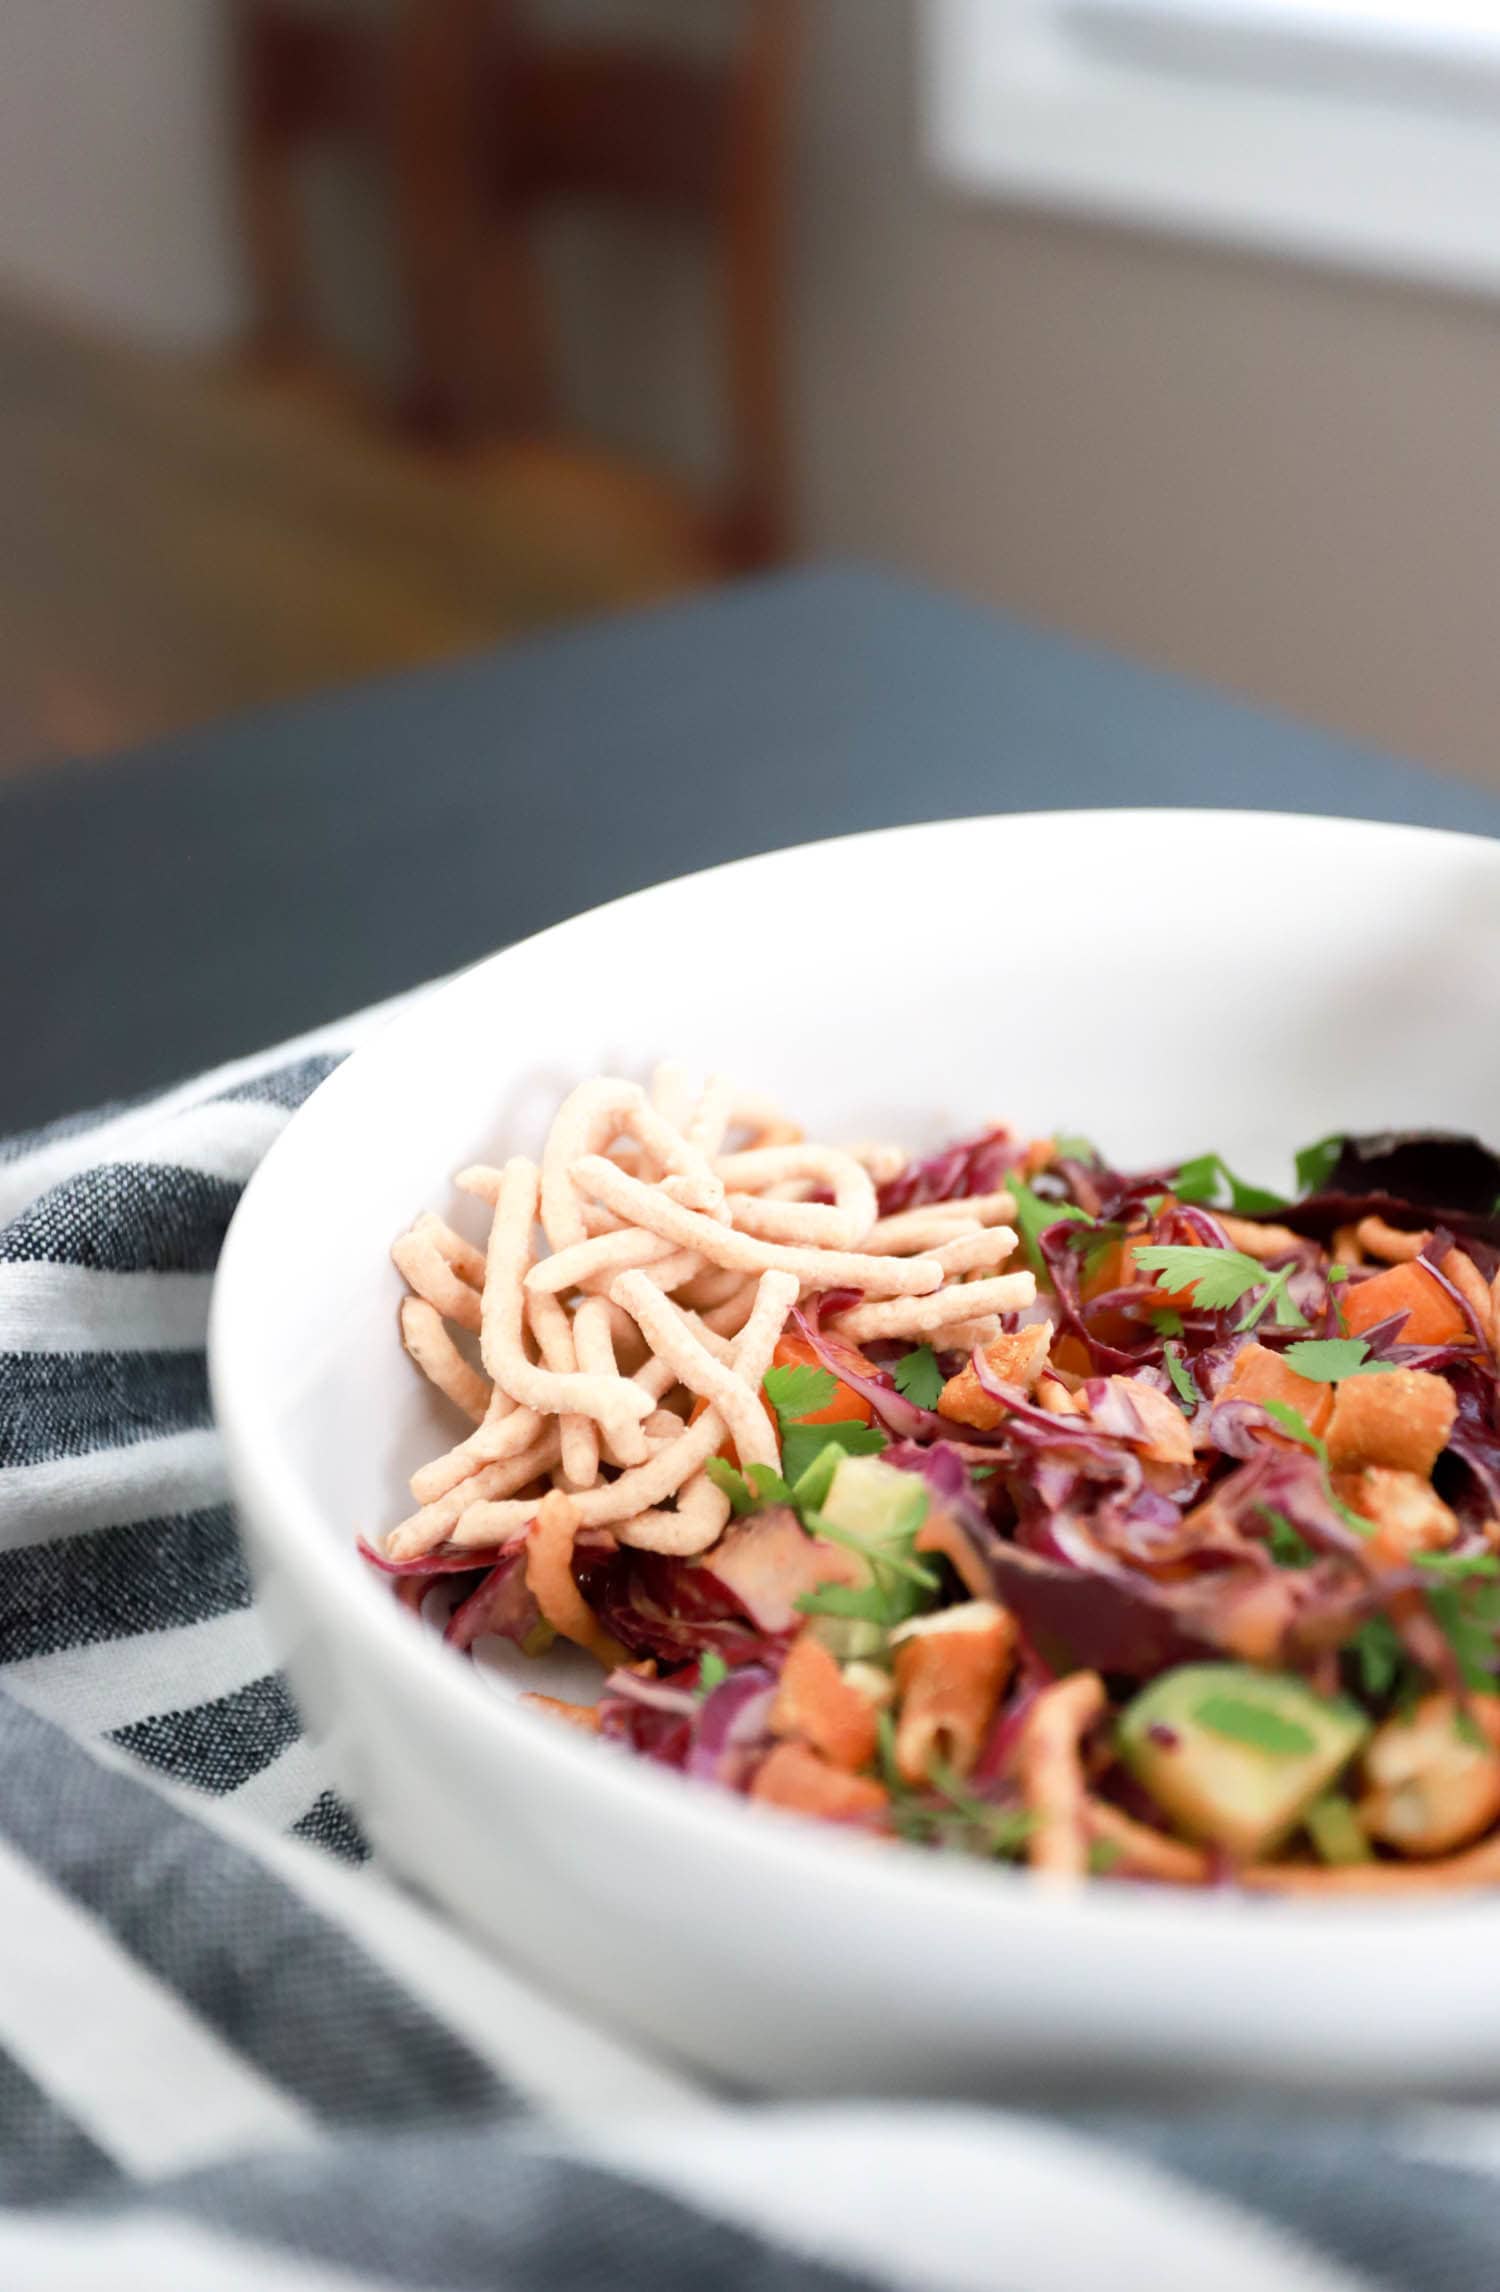 Spicy Peanut Sauce with red cabbage chopped salad. Perfect for meal prepping!